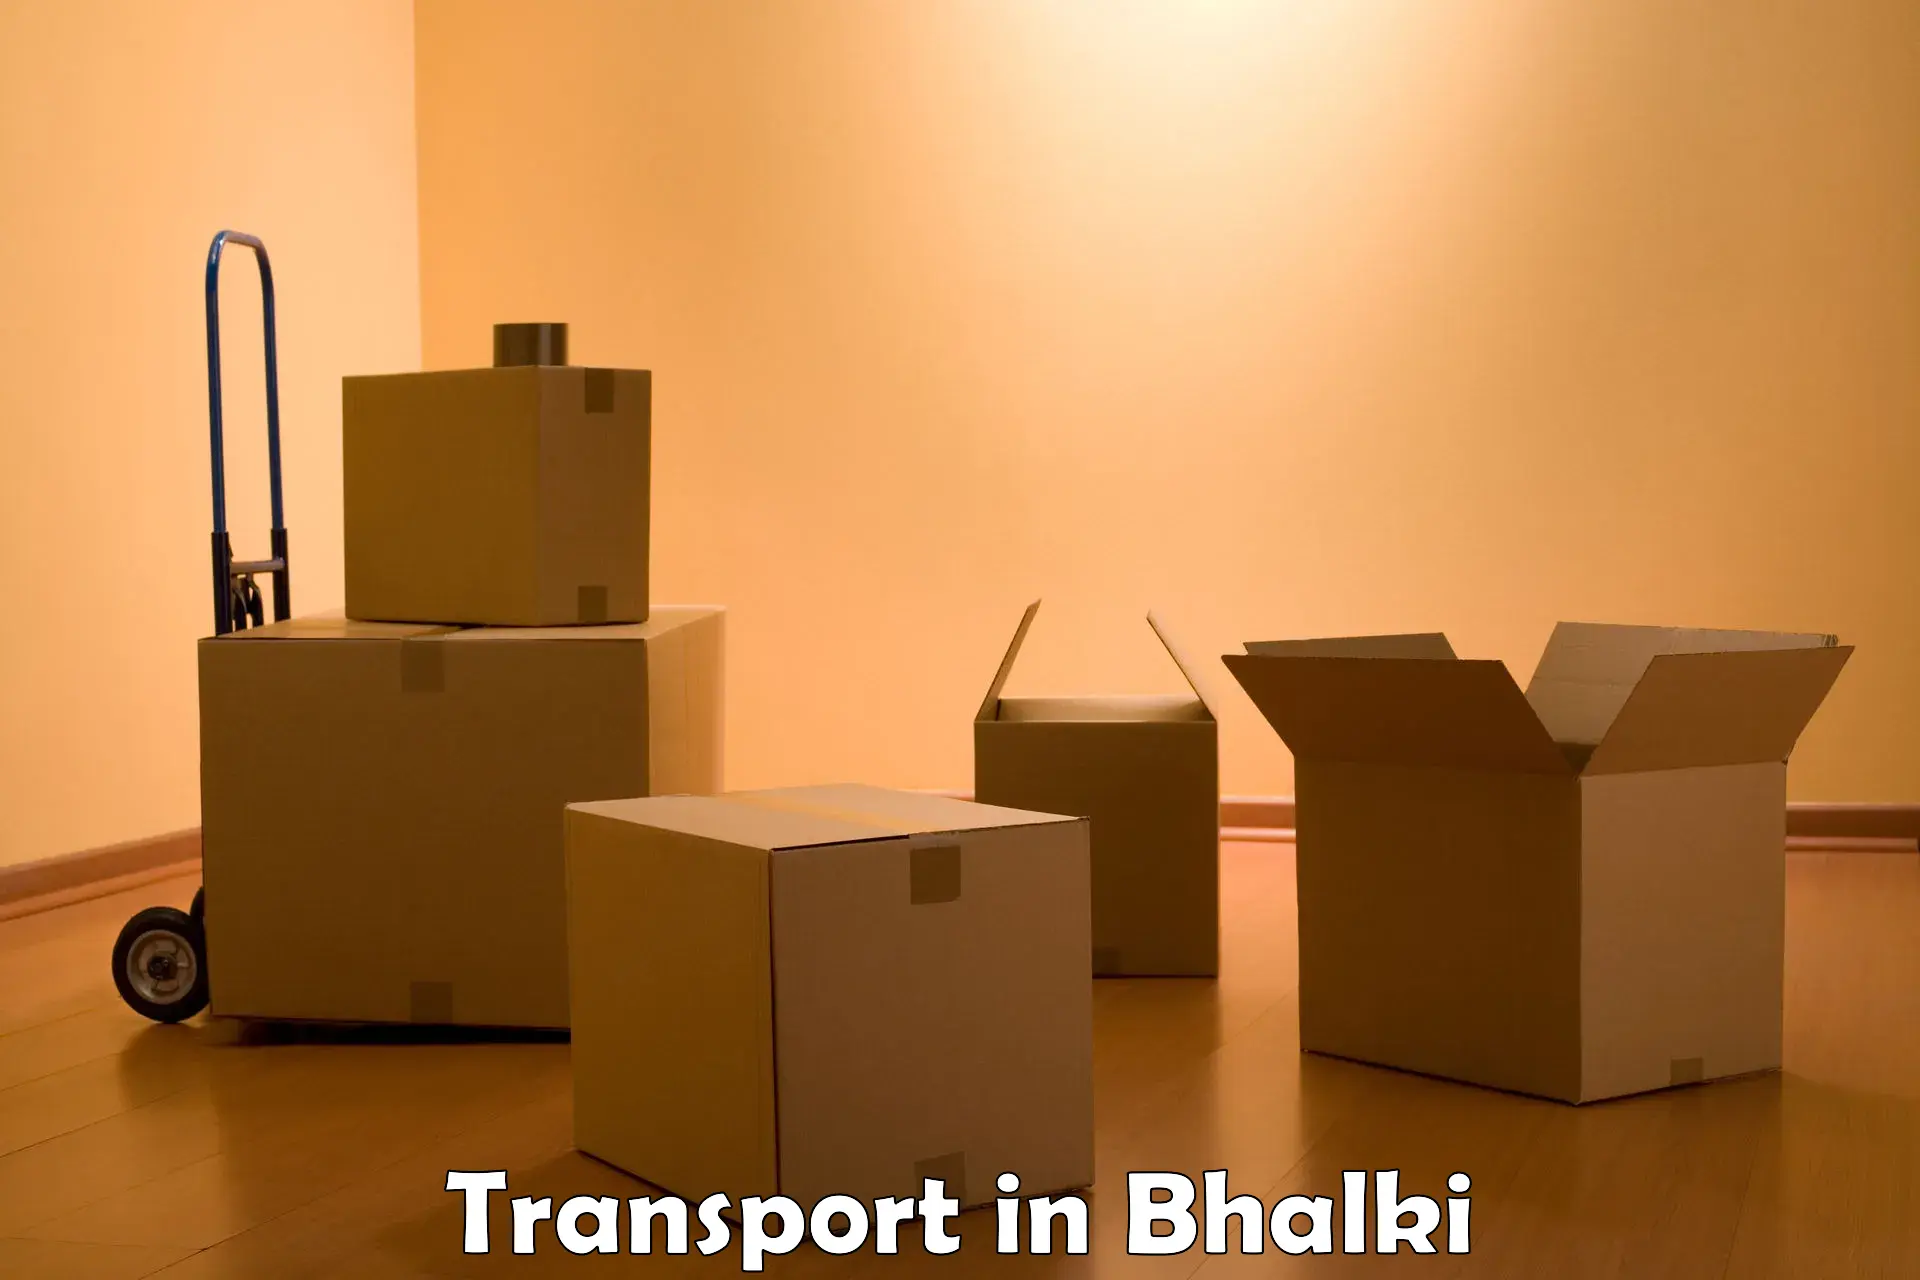 Container transport service in Bhalki